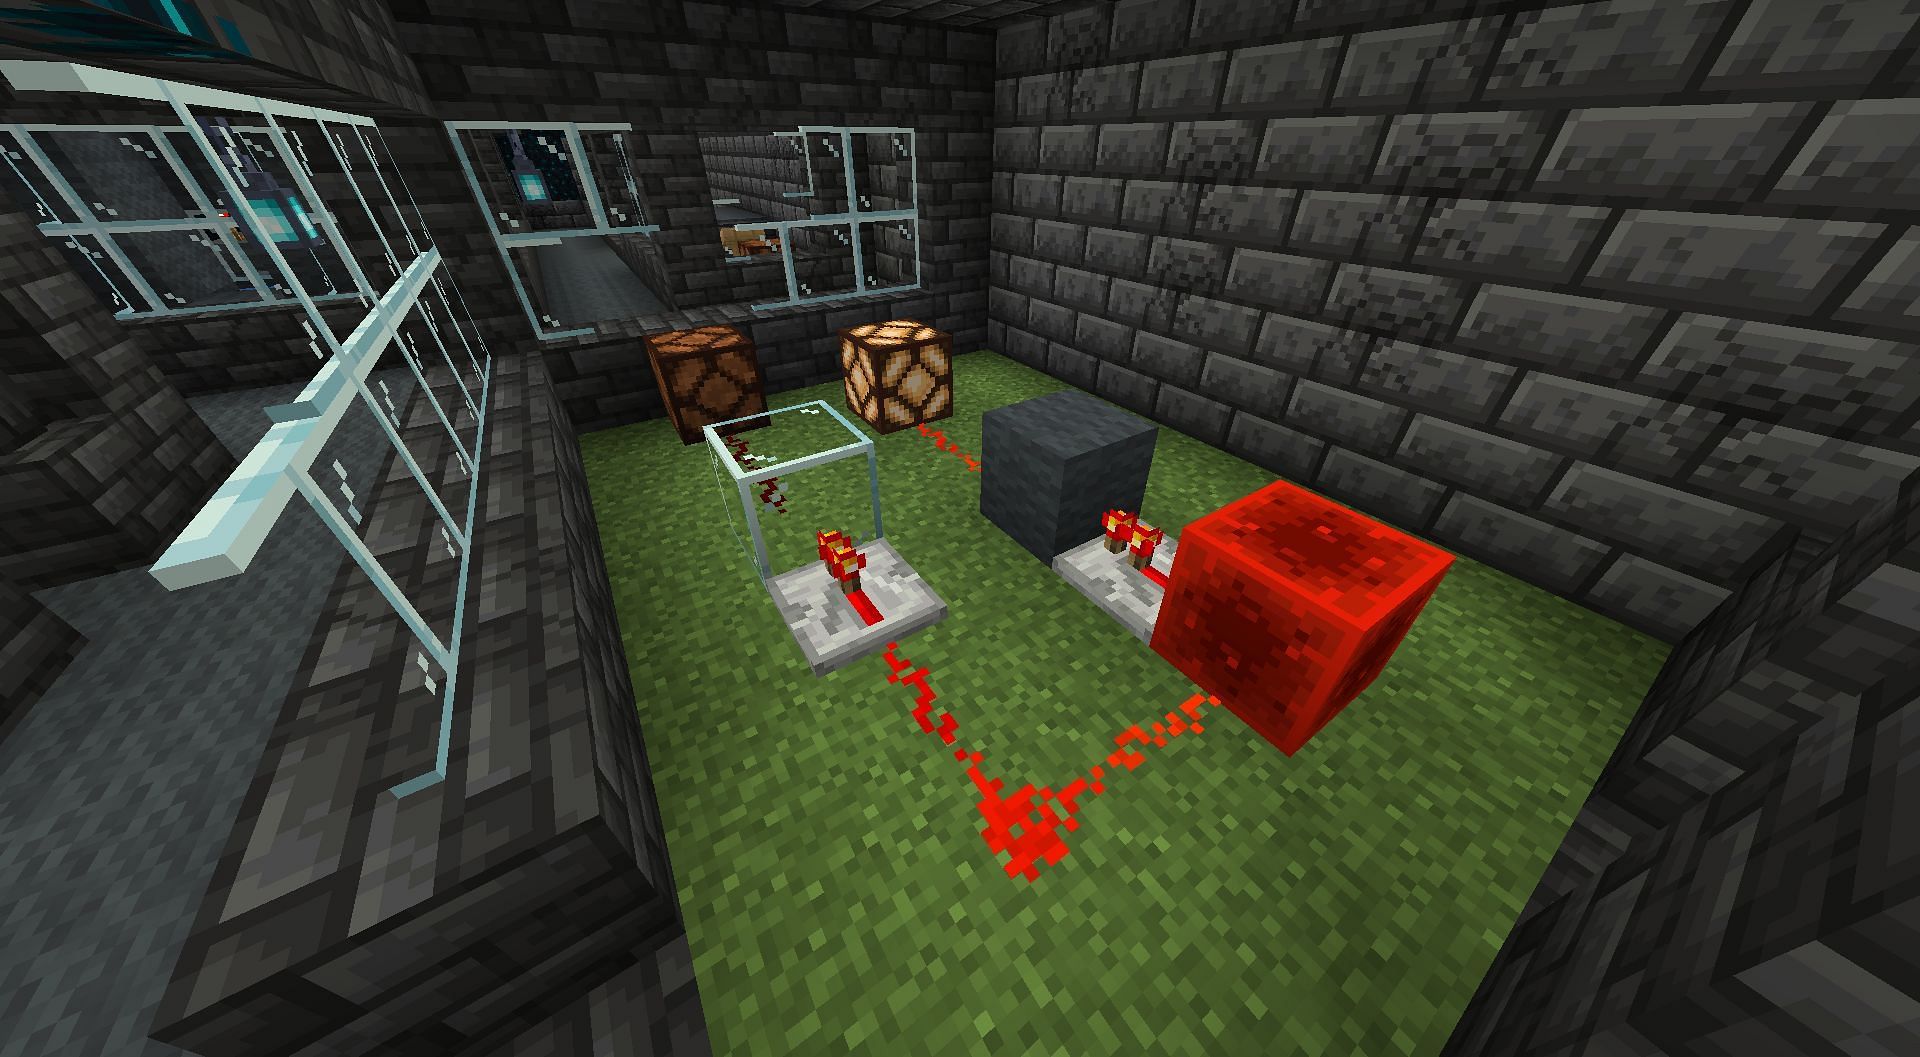 Redstone allows players to automate loads of tasks in the game (Image via Mojang)